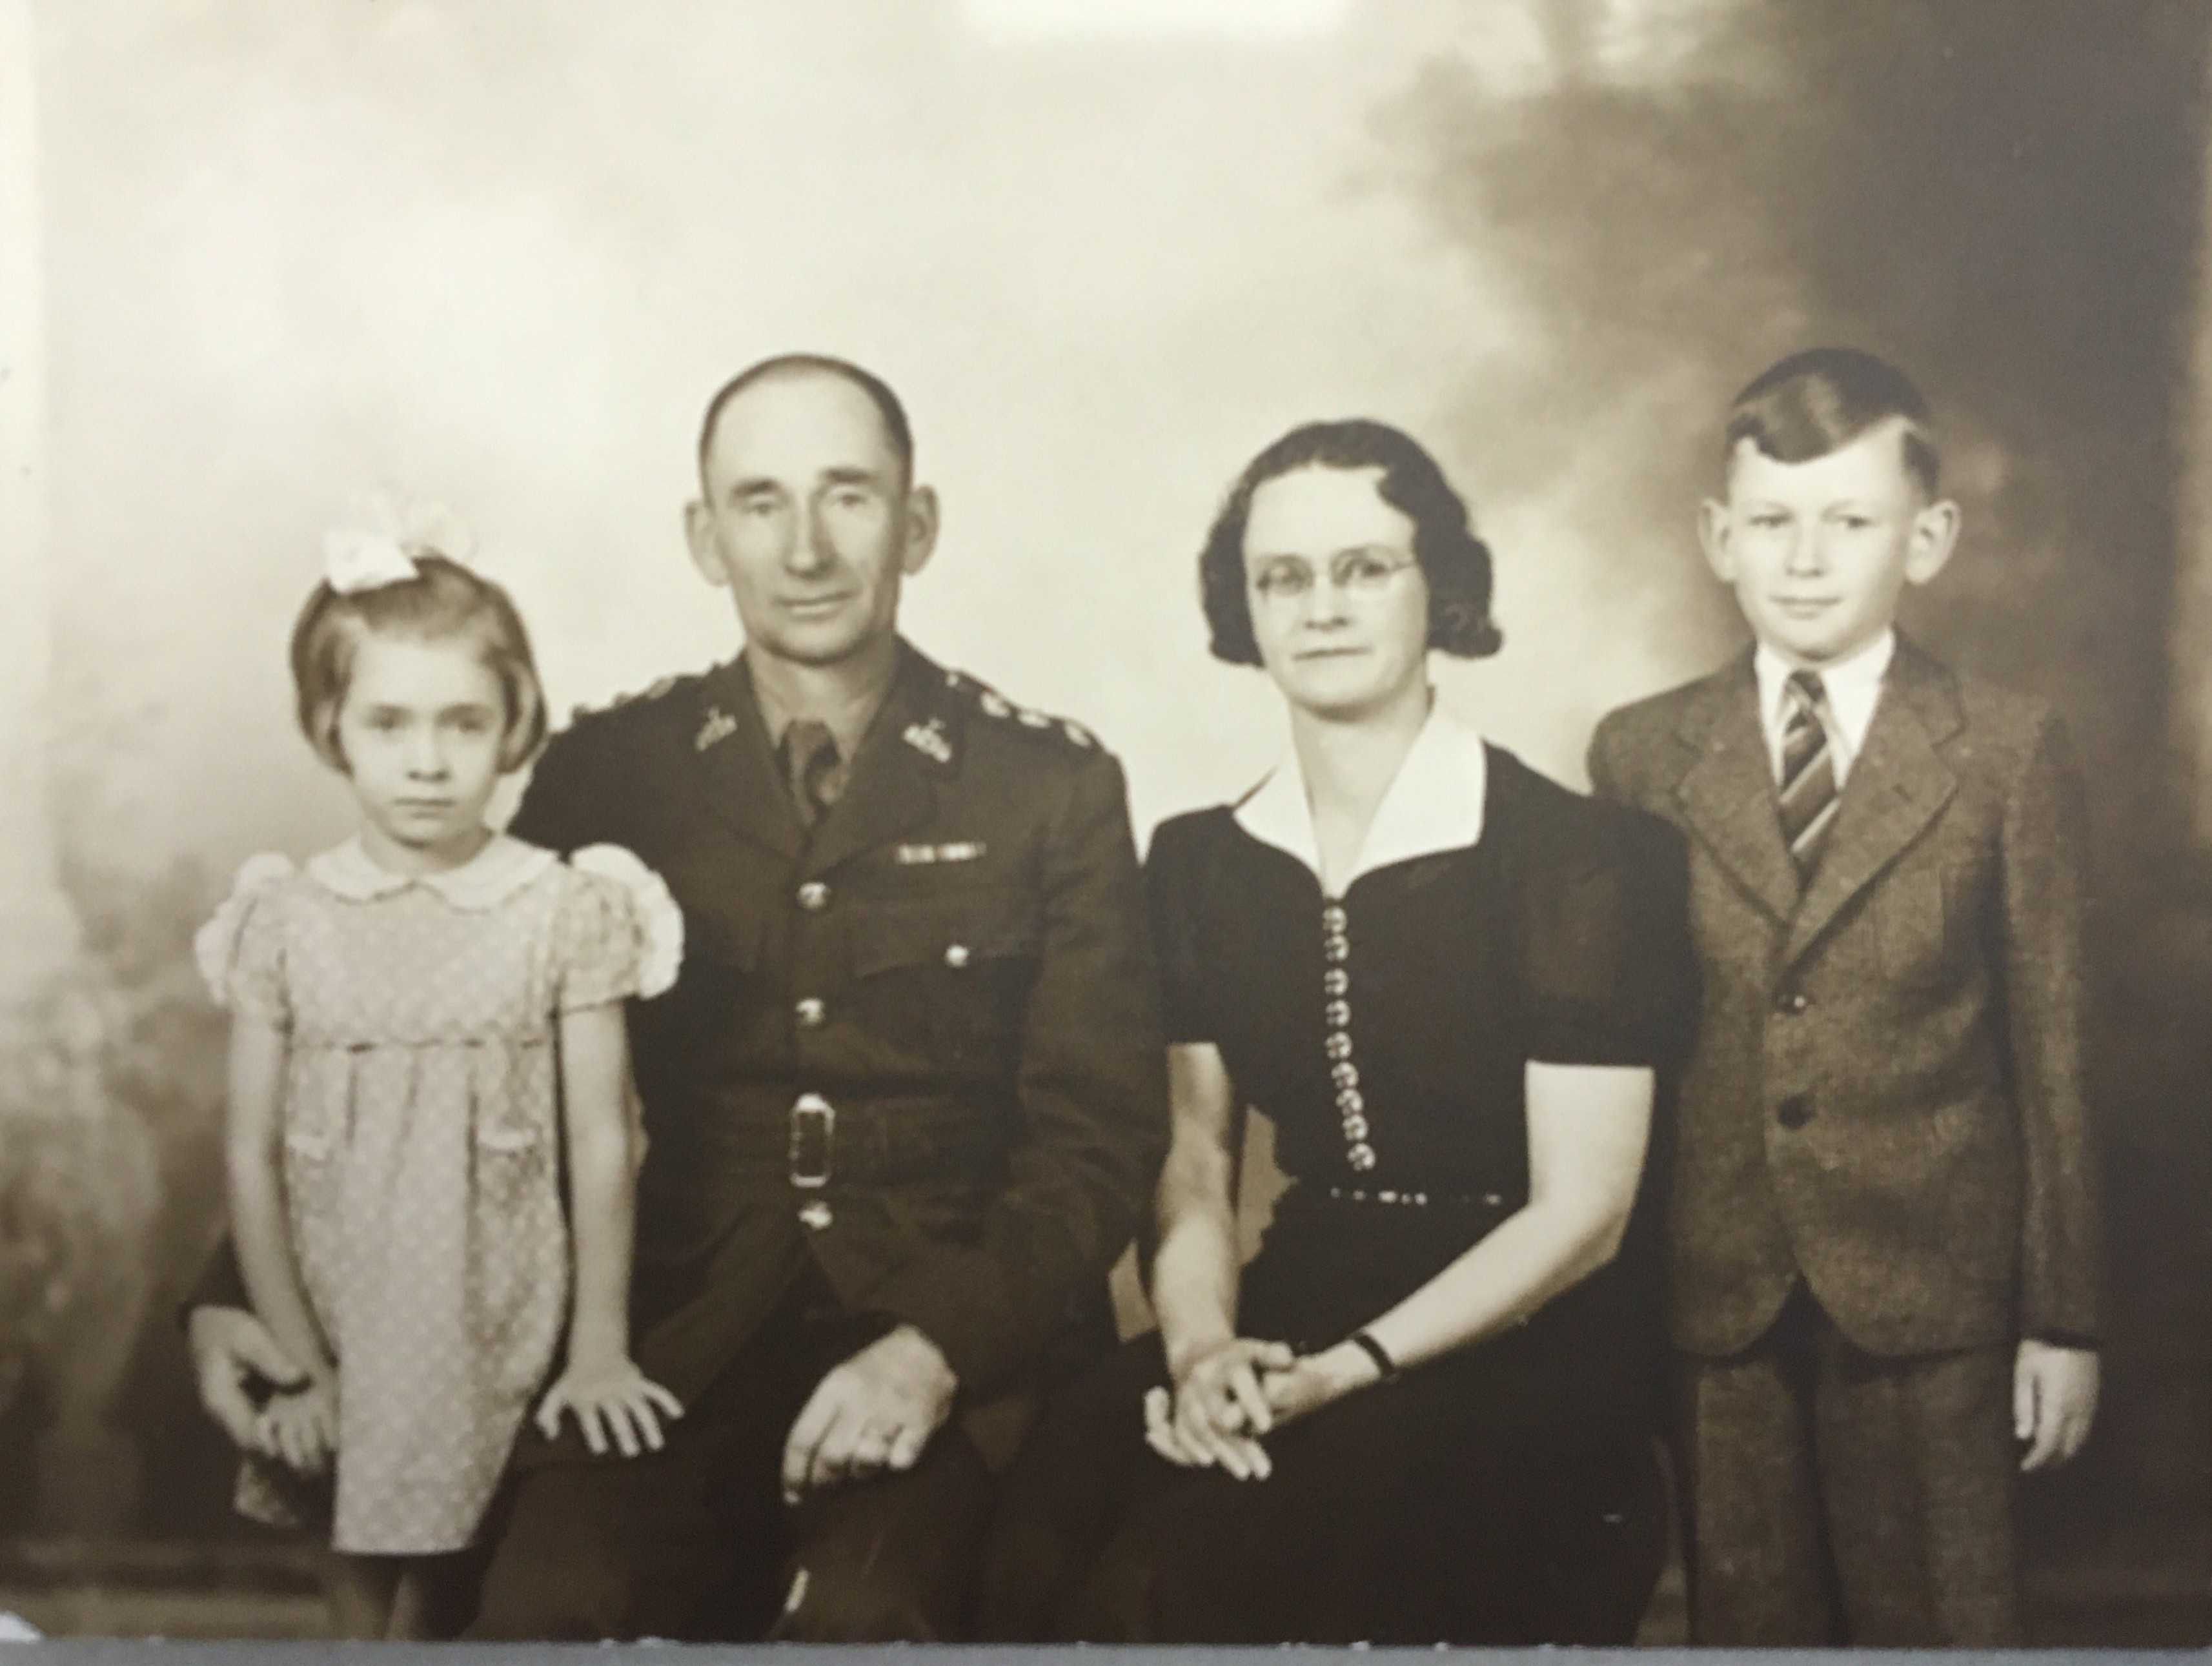 Black and white photograph. Archie, in uniform, has his right arm around daughter Margaret. Wife Grace is to his left, and son Francis is to her left.